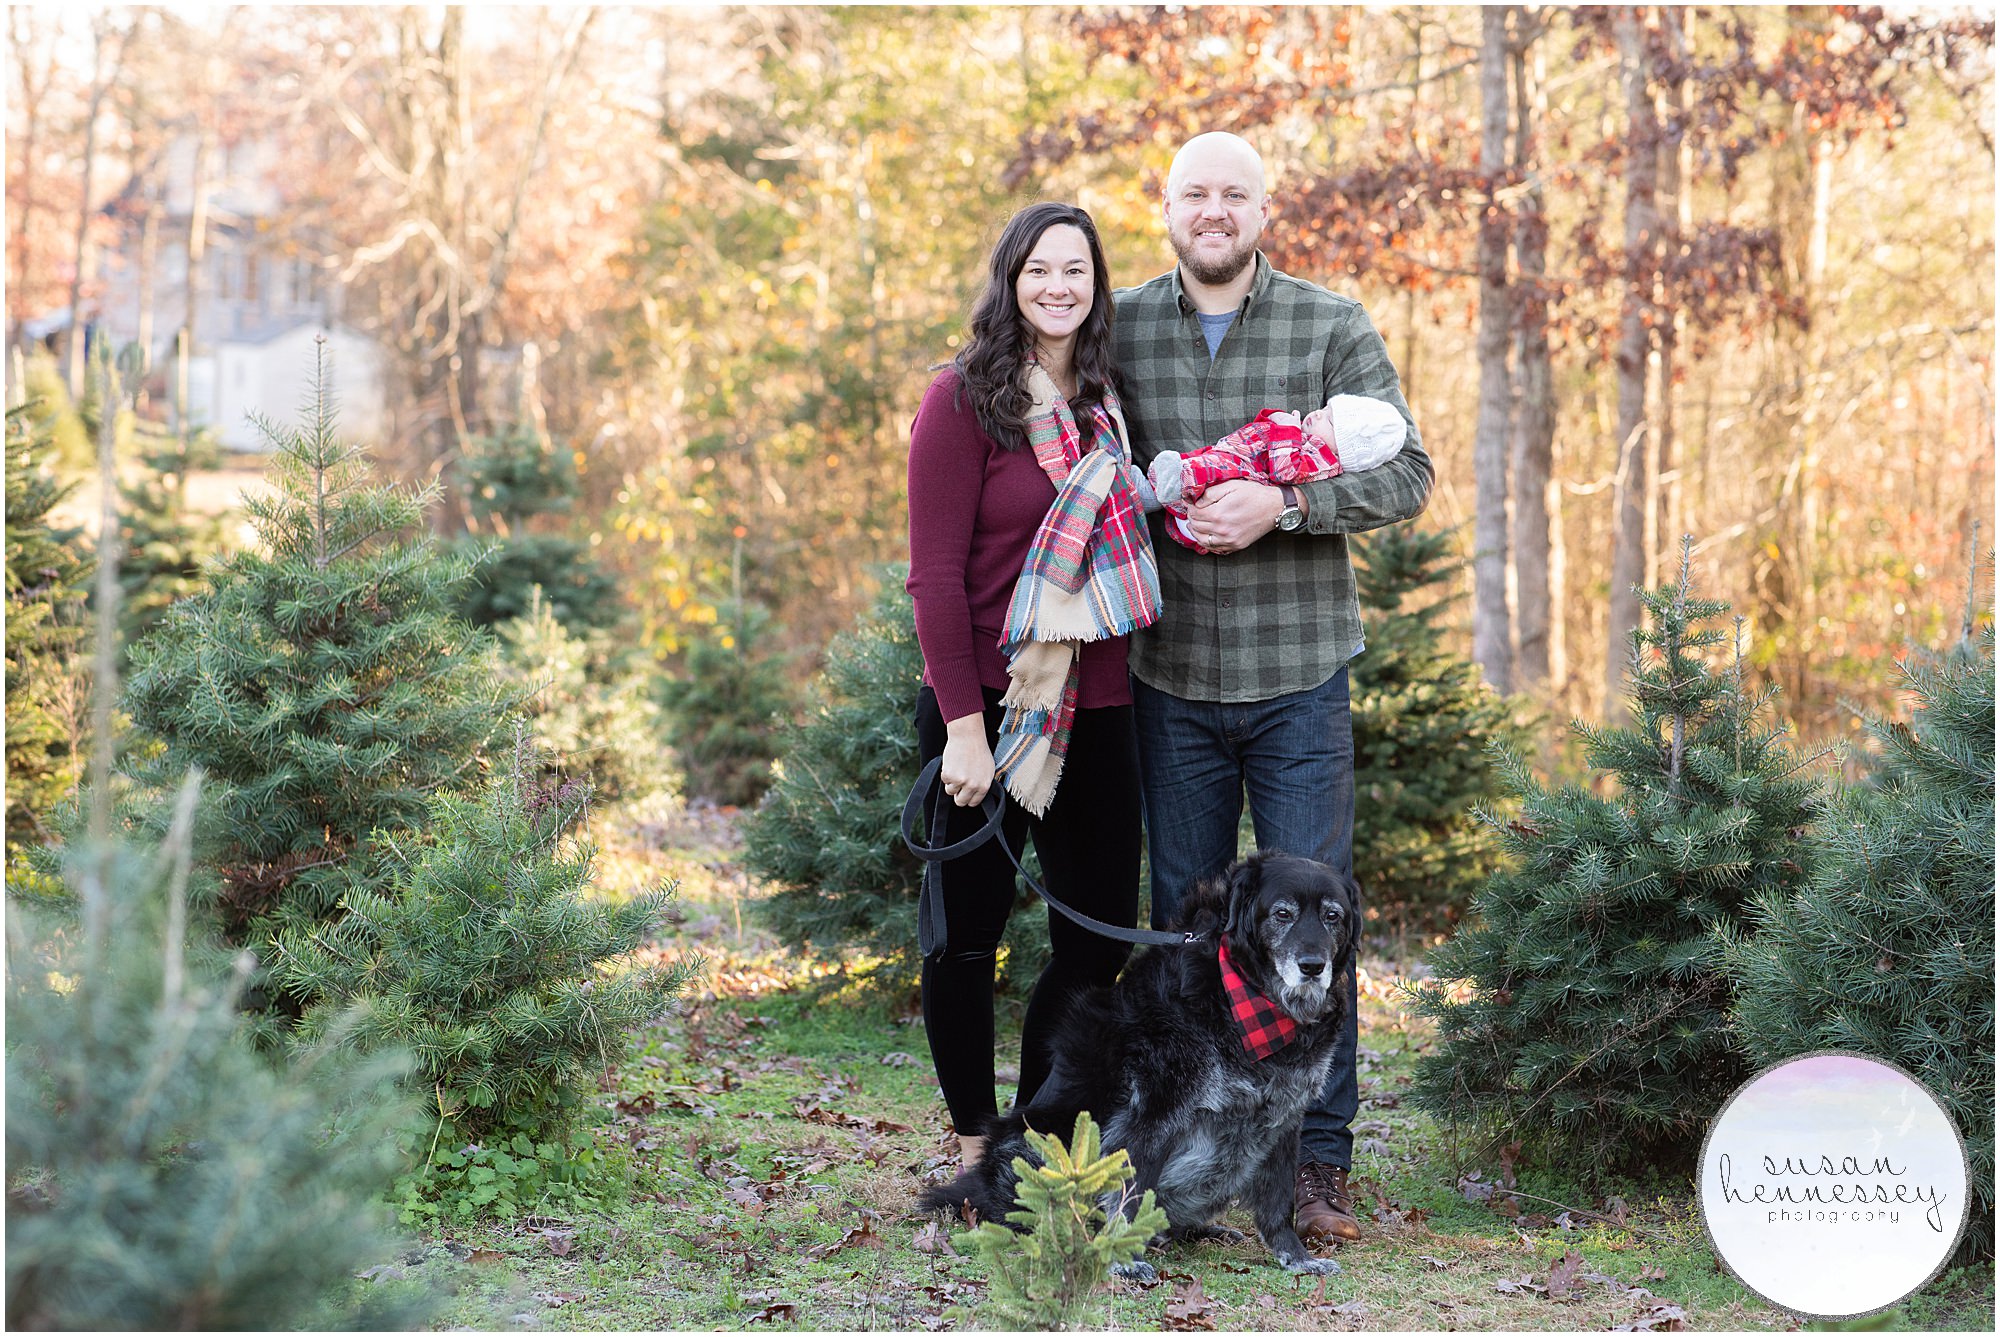 Susan Hennessey Photography, a photographer in South Jersey photographs yearly South Jersey holiday family photo sessions at Christmas Tree Farms.